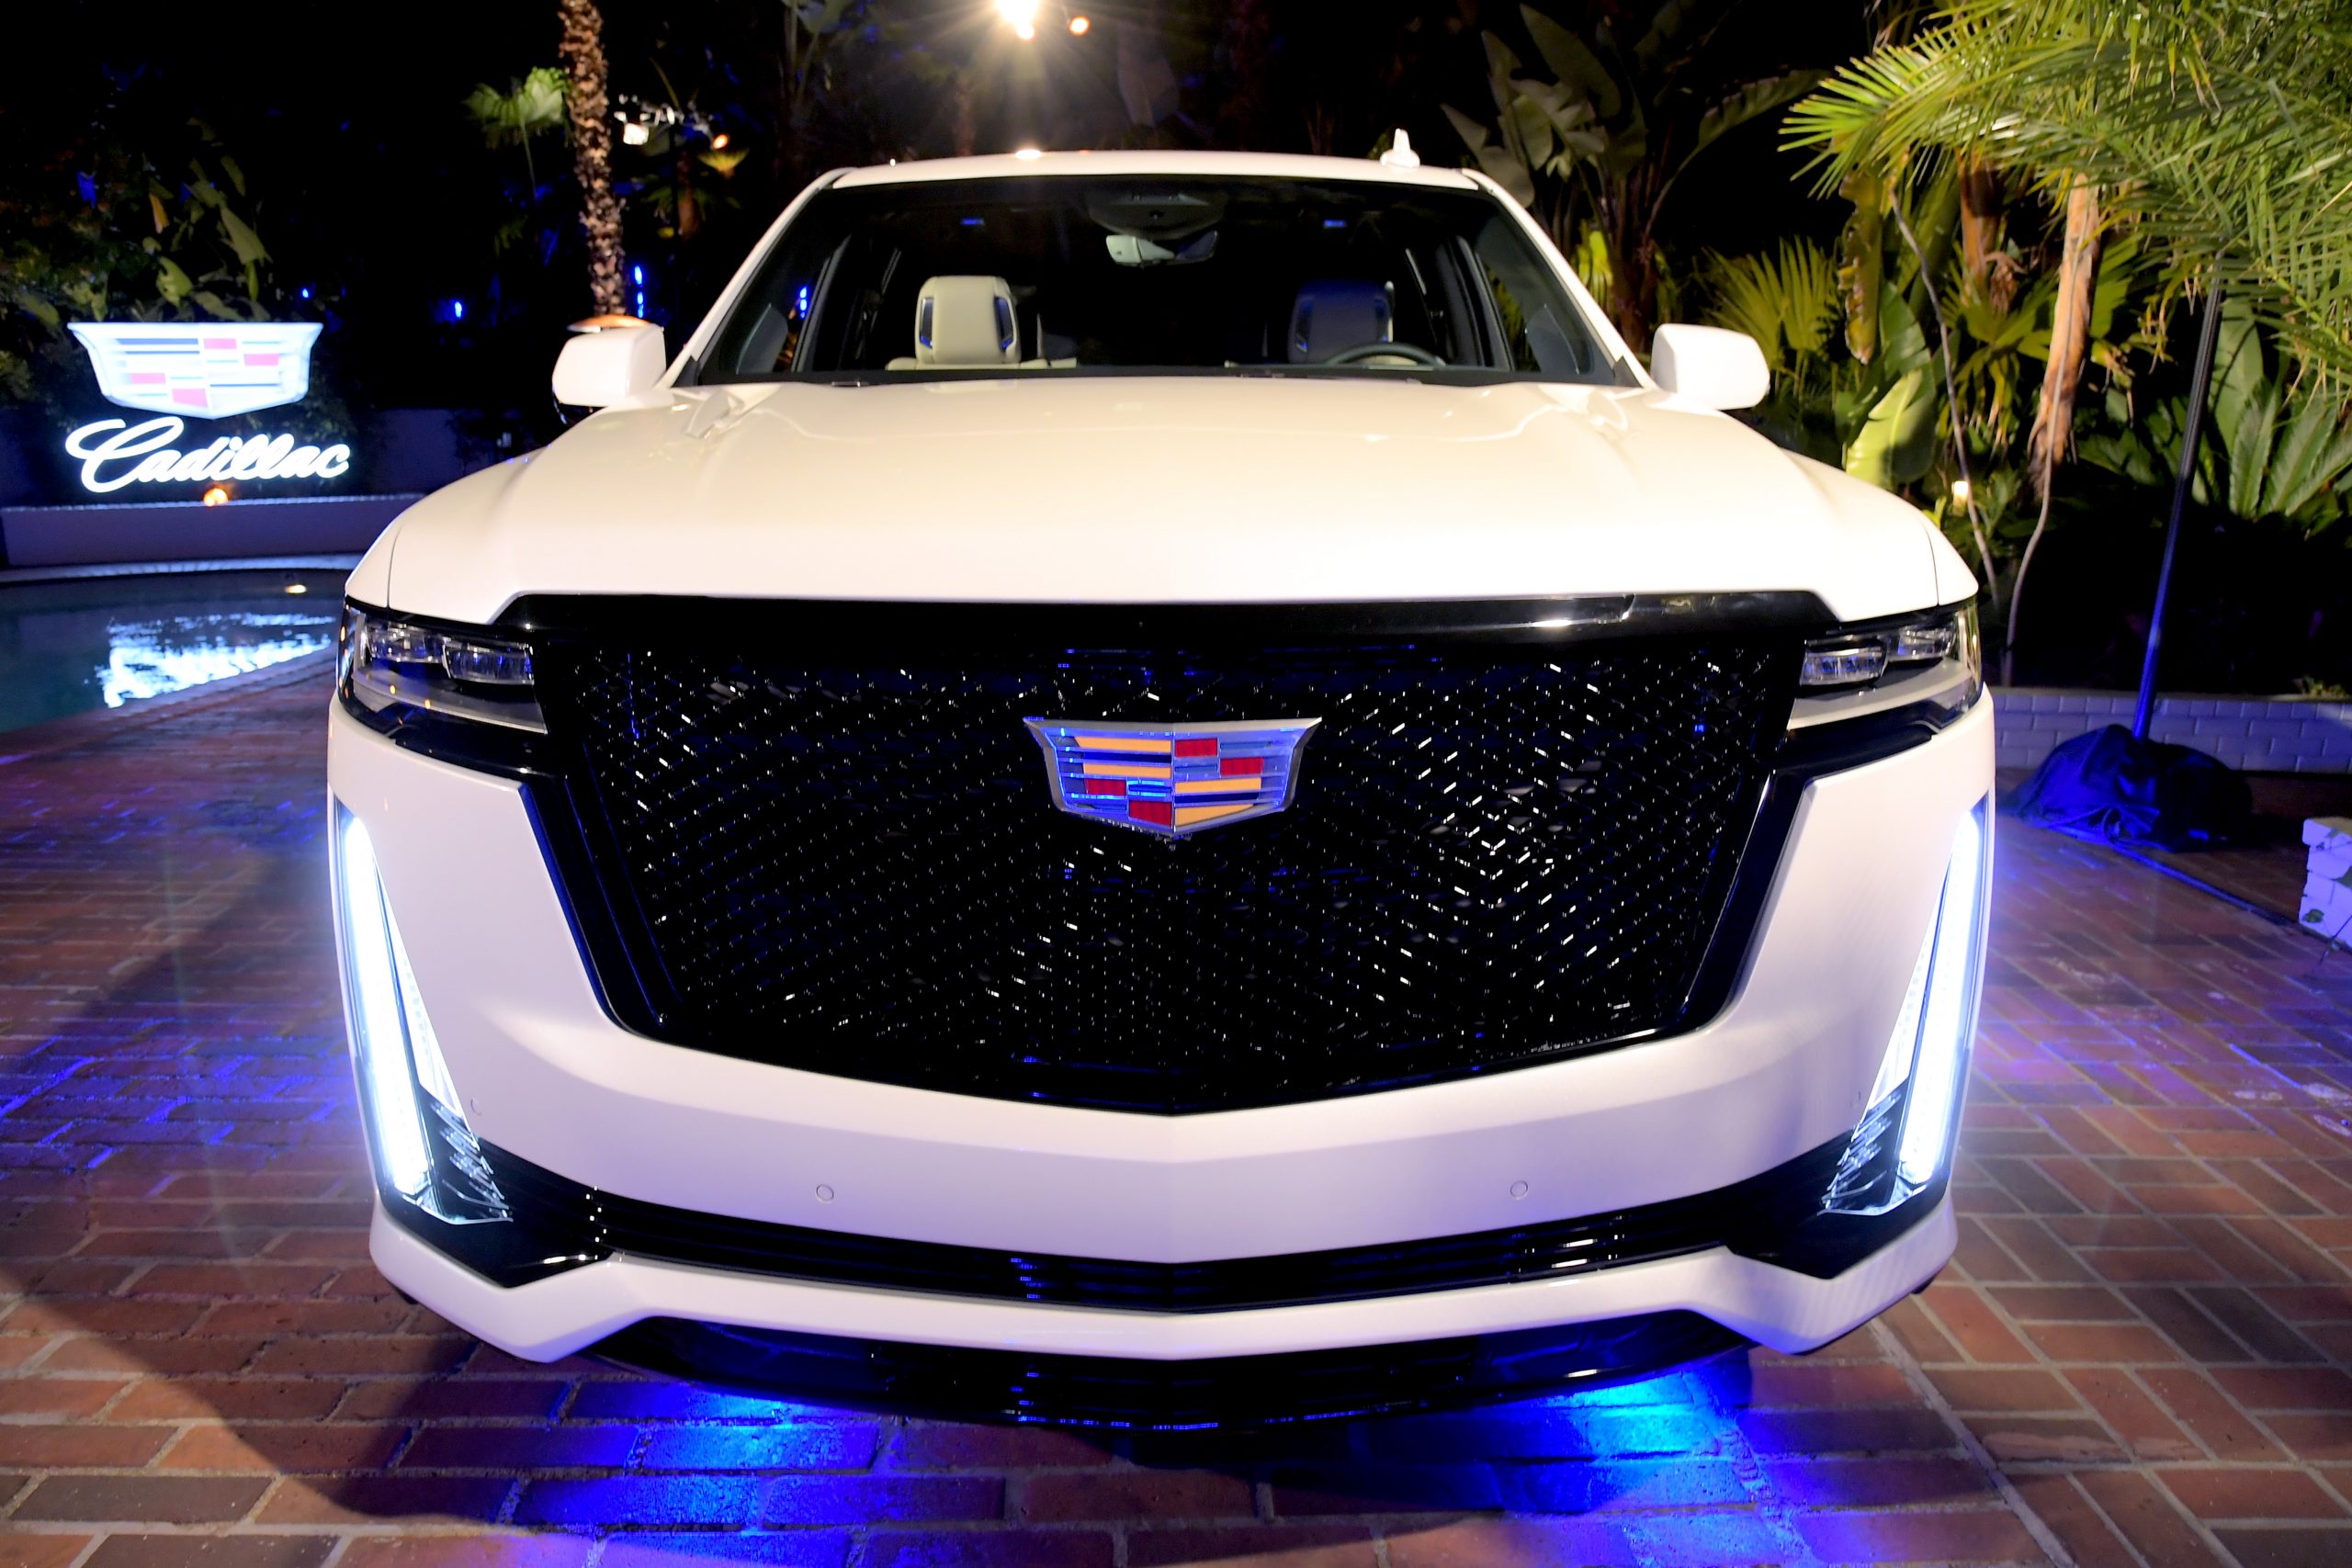 The white 2021 Cadillac Escalade is displayed during the Cadillac Oscar Week Celebration at Chateau Marmont on February 6, 2020 in Los Angeles, California.